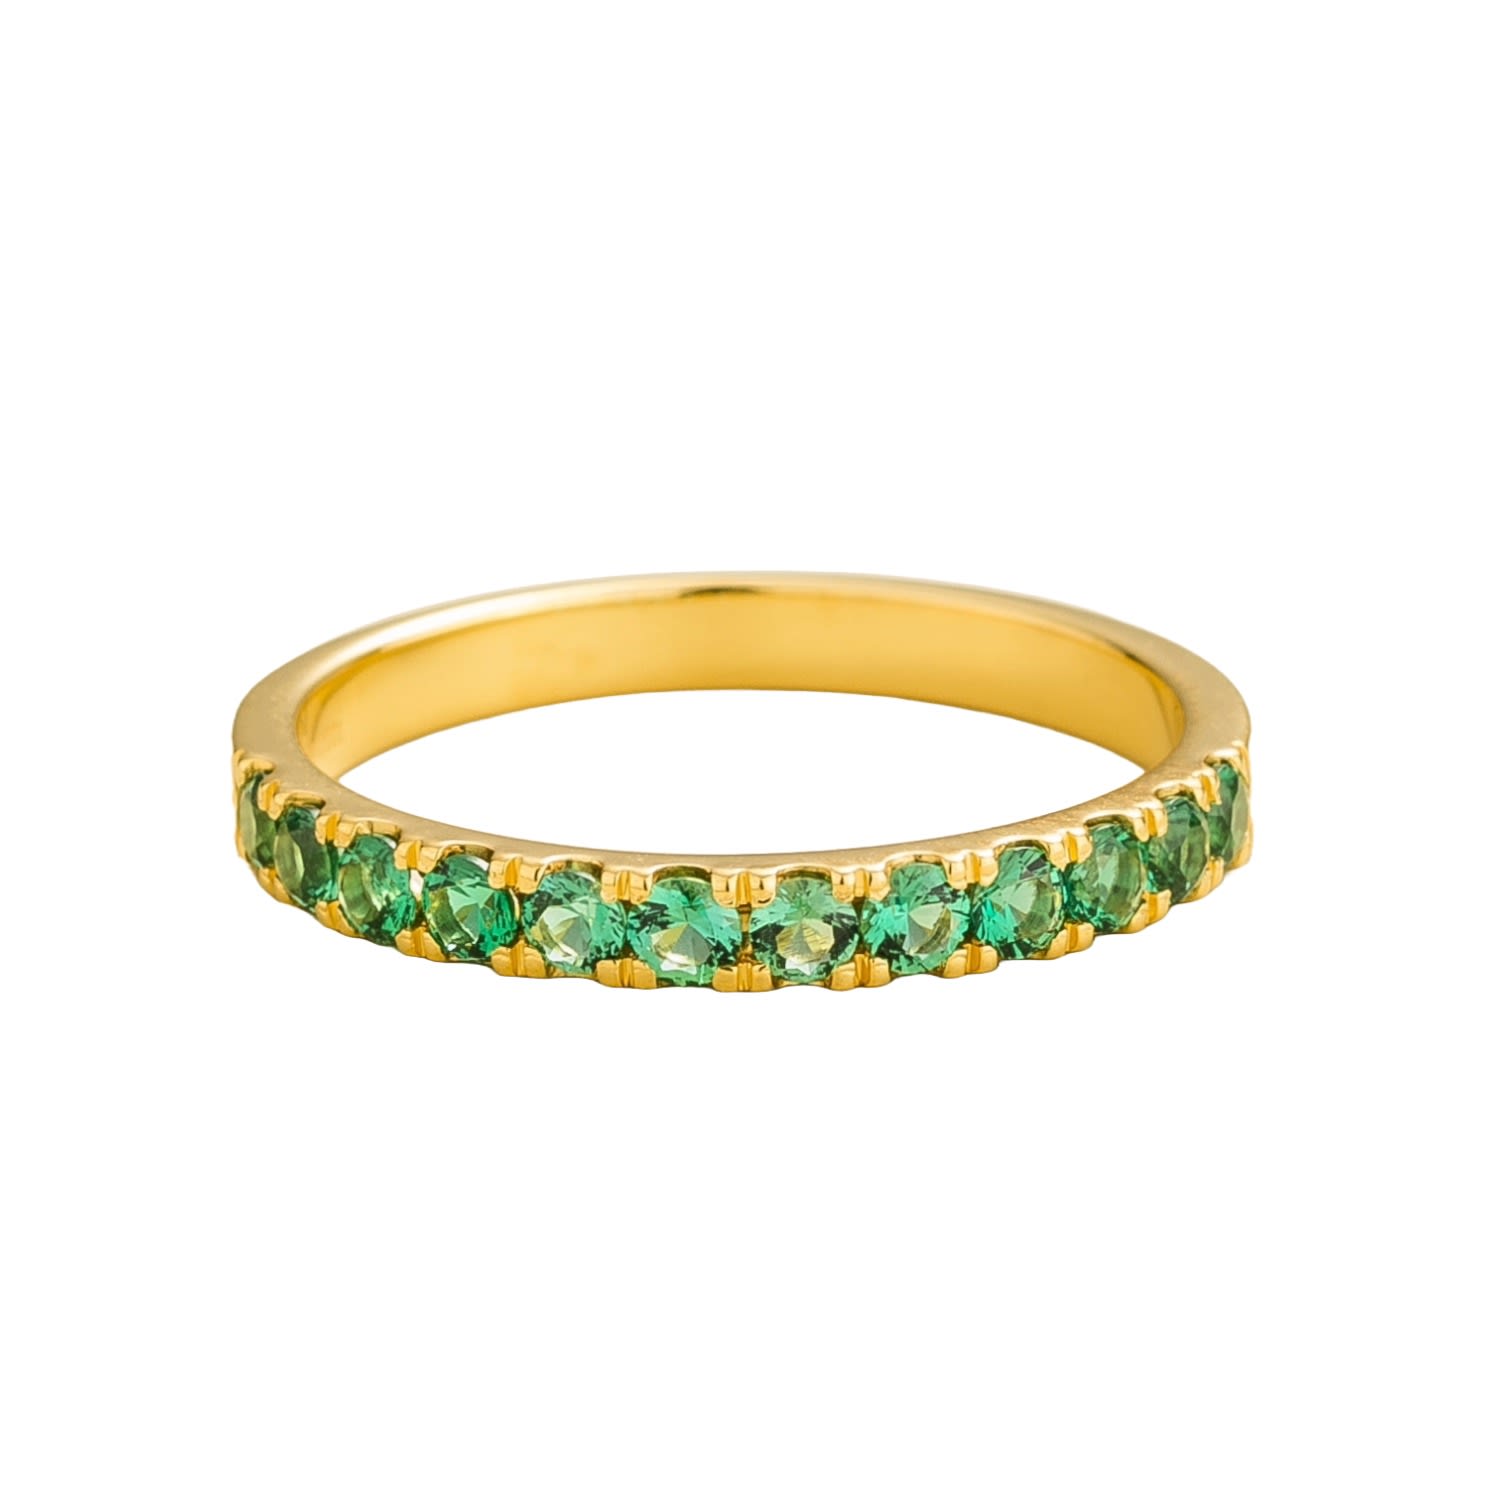 Juvetti Women's Gold / Green Salto Gold Ring Set With Emerald